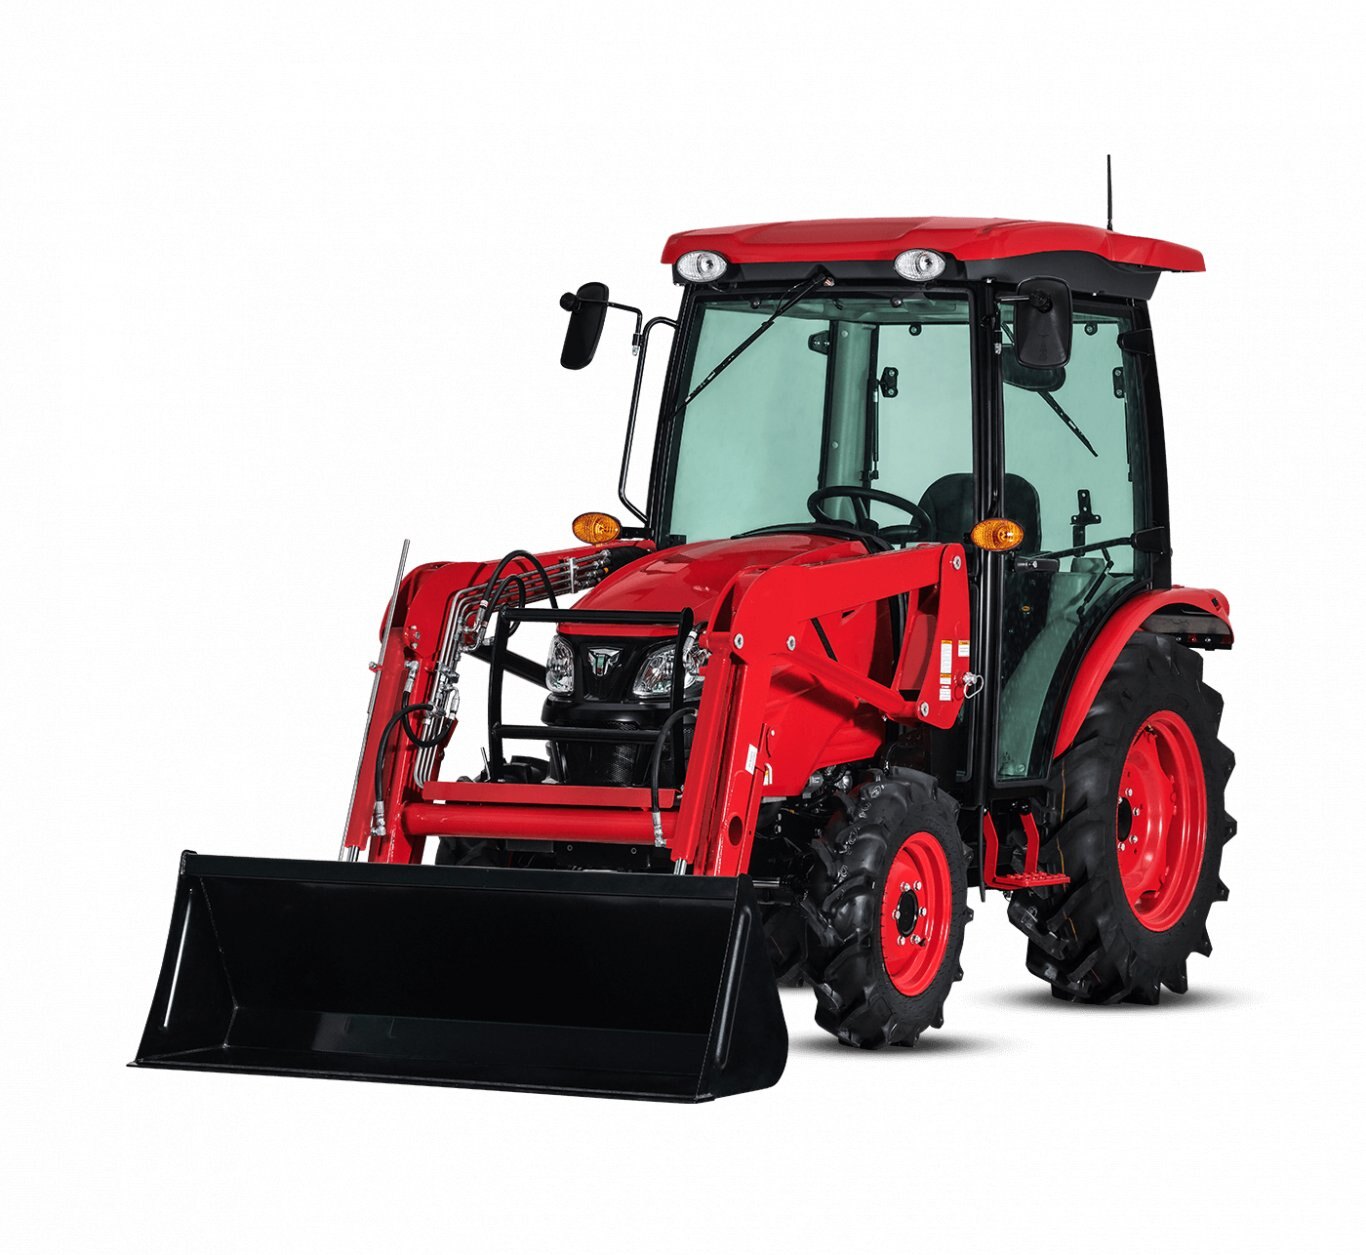 TYM Tractors Series 2 Compact T394C